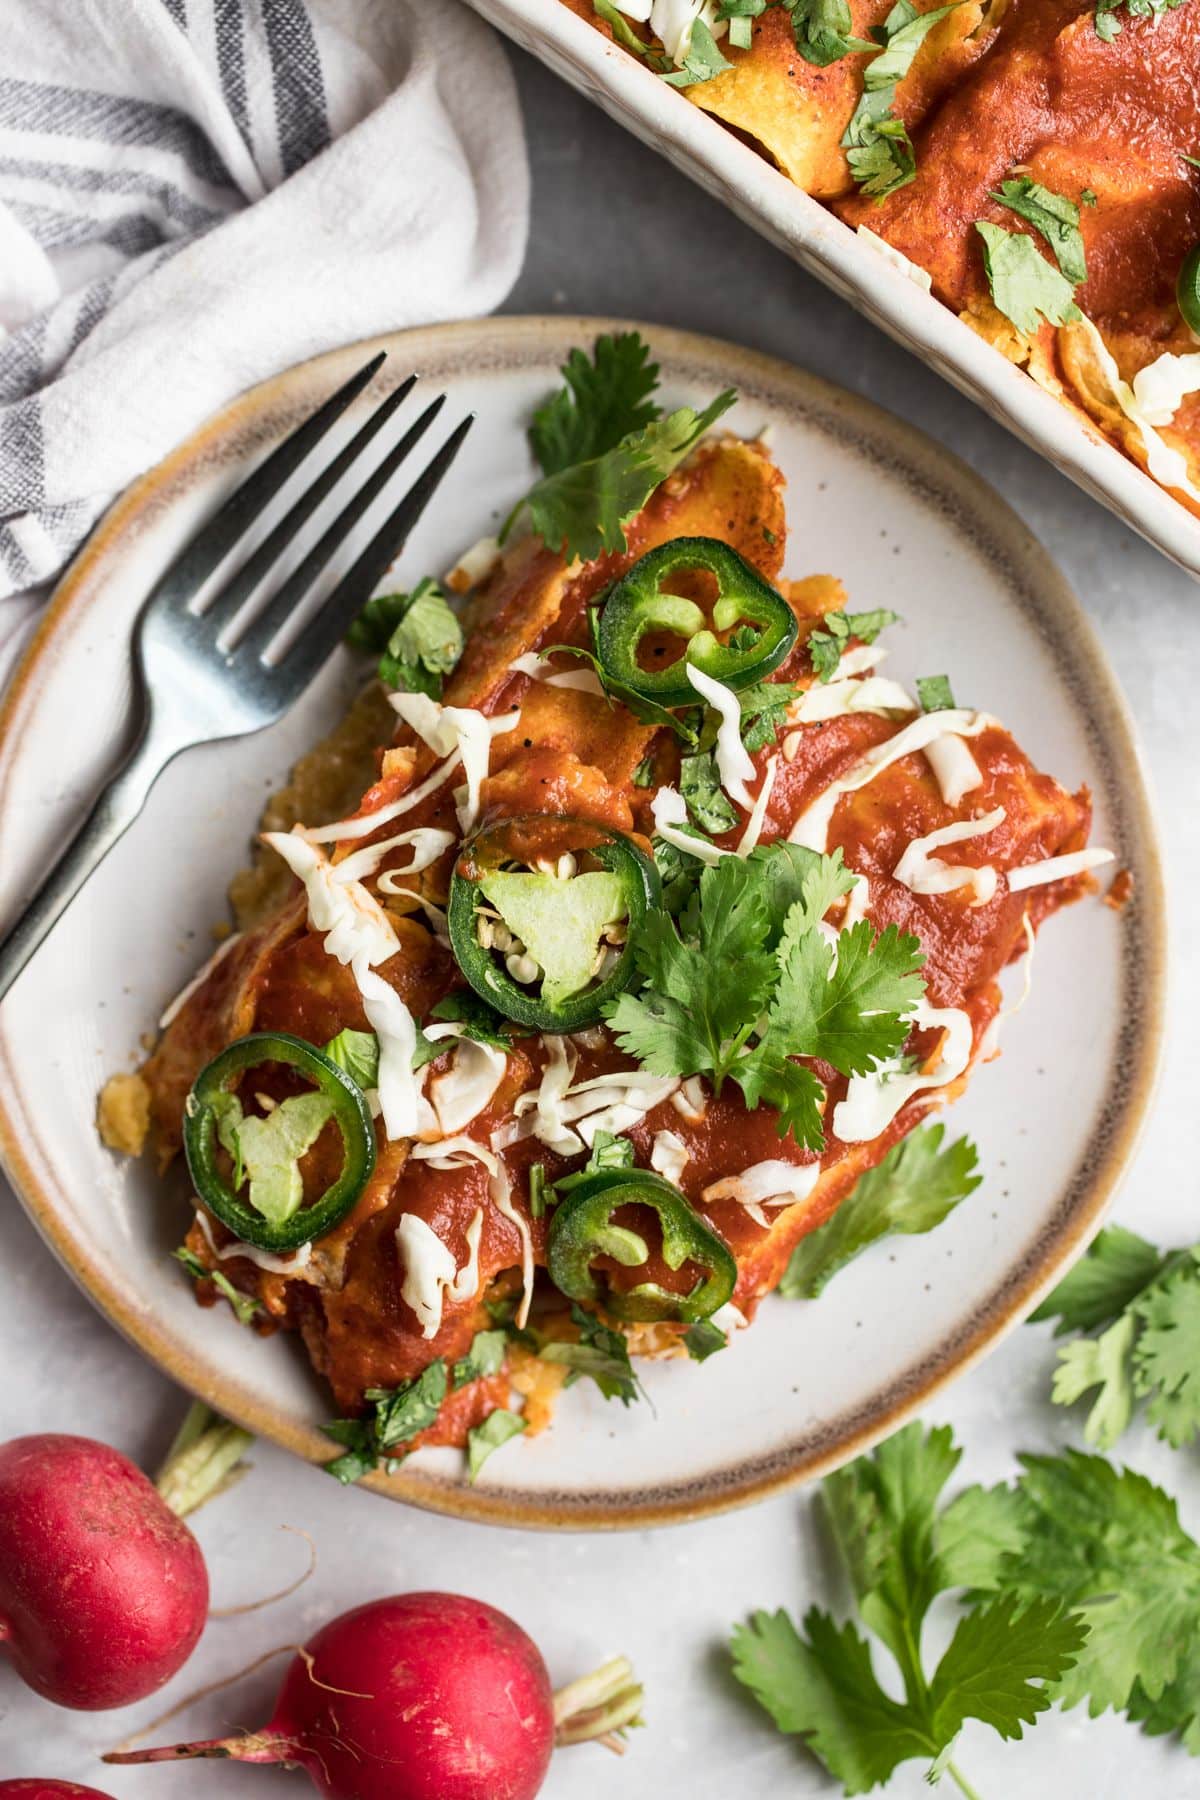 High Protein Chicken Enchiladas! These skinny enchiladas are made with a few simple, healthy swaps. They are creamy on the inside and spicy on the outside. Only 320 calories per serving and made with real food! Gluten Free + Low Calorie